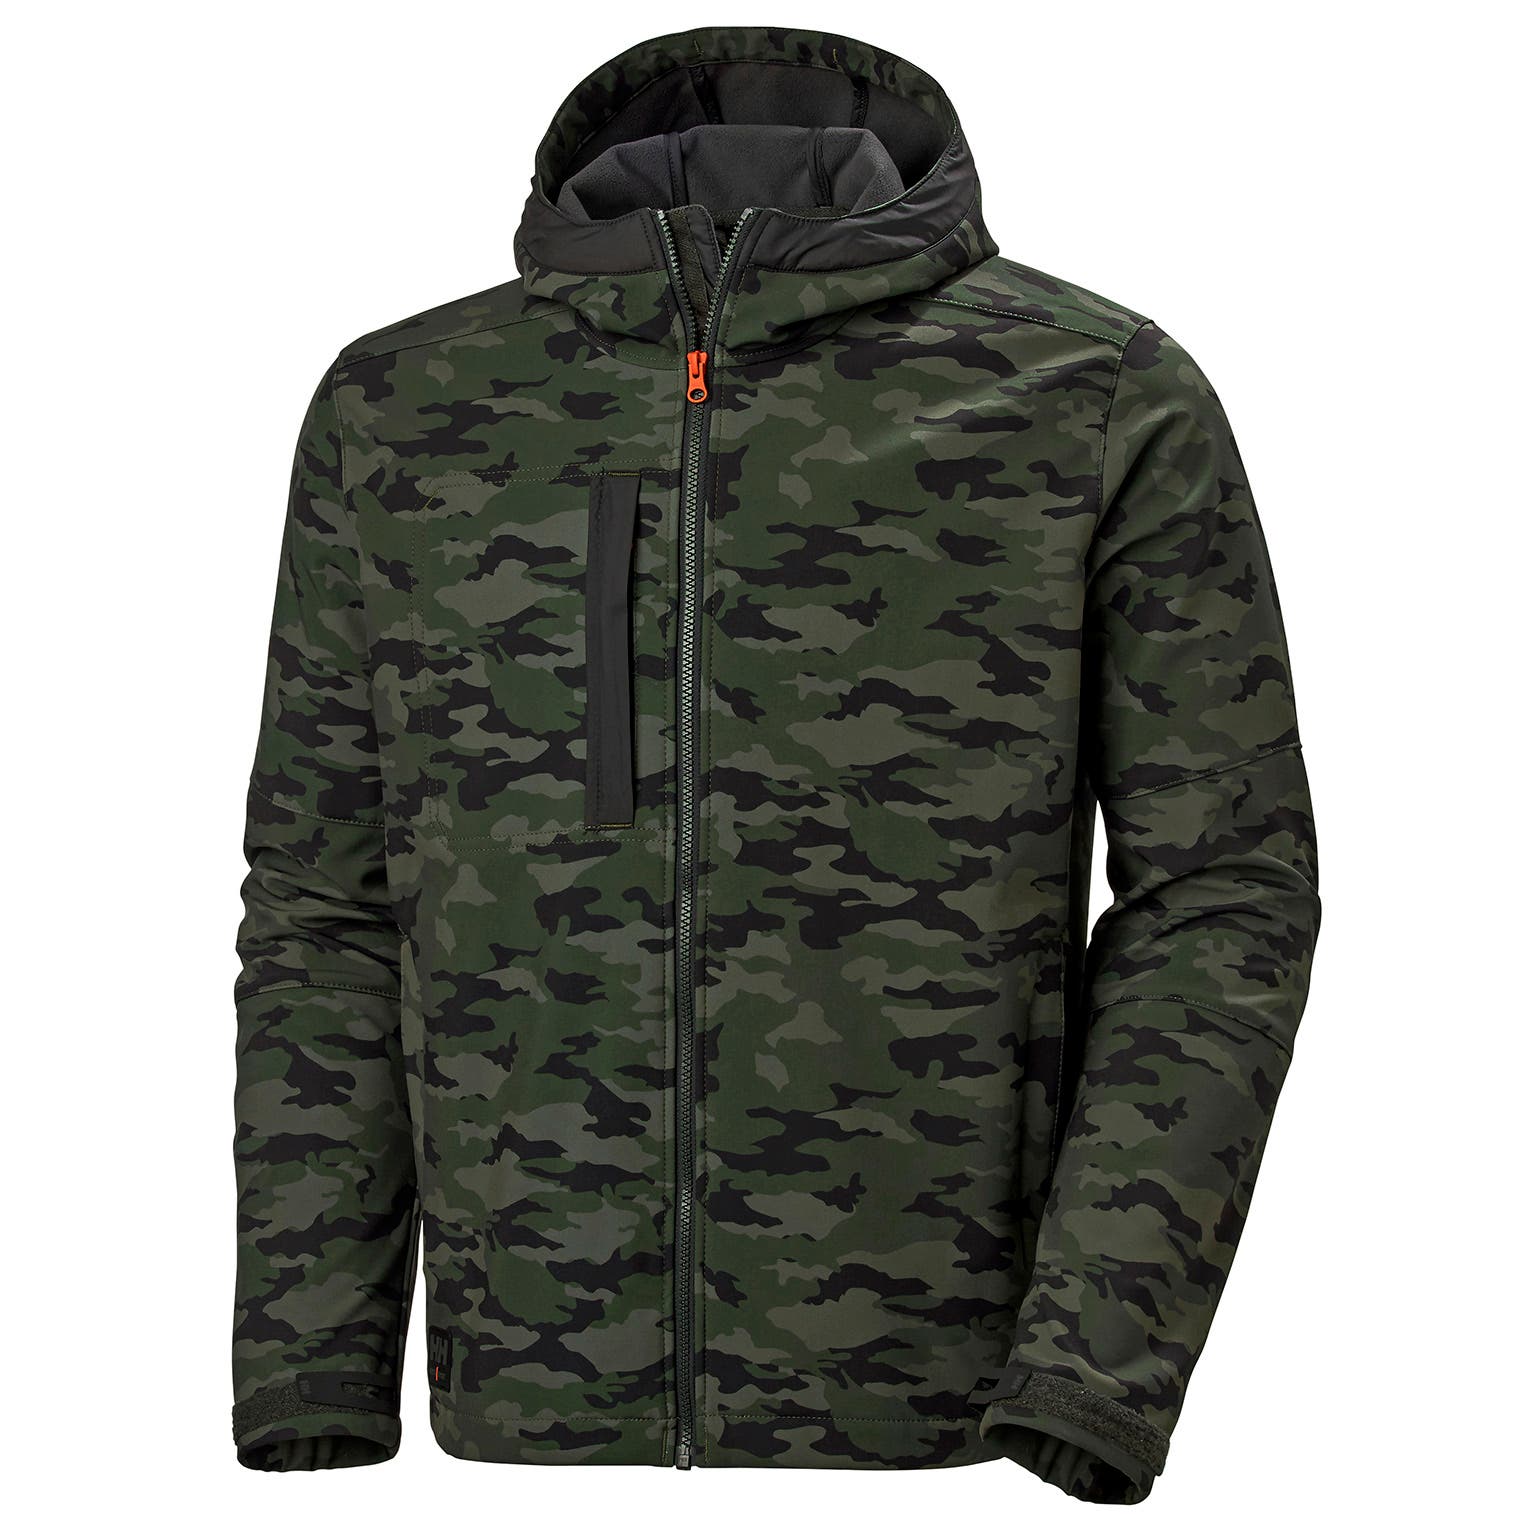 Helly Hansen Men's Kensington Hooded Softshell Jacket in Camo from the front